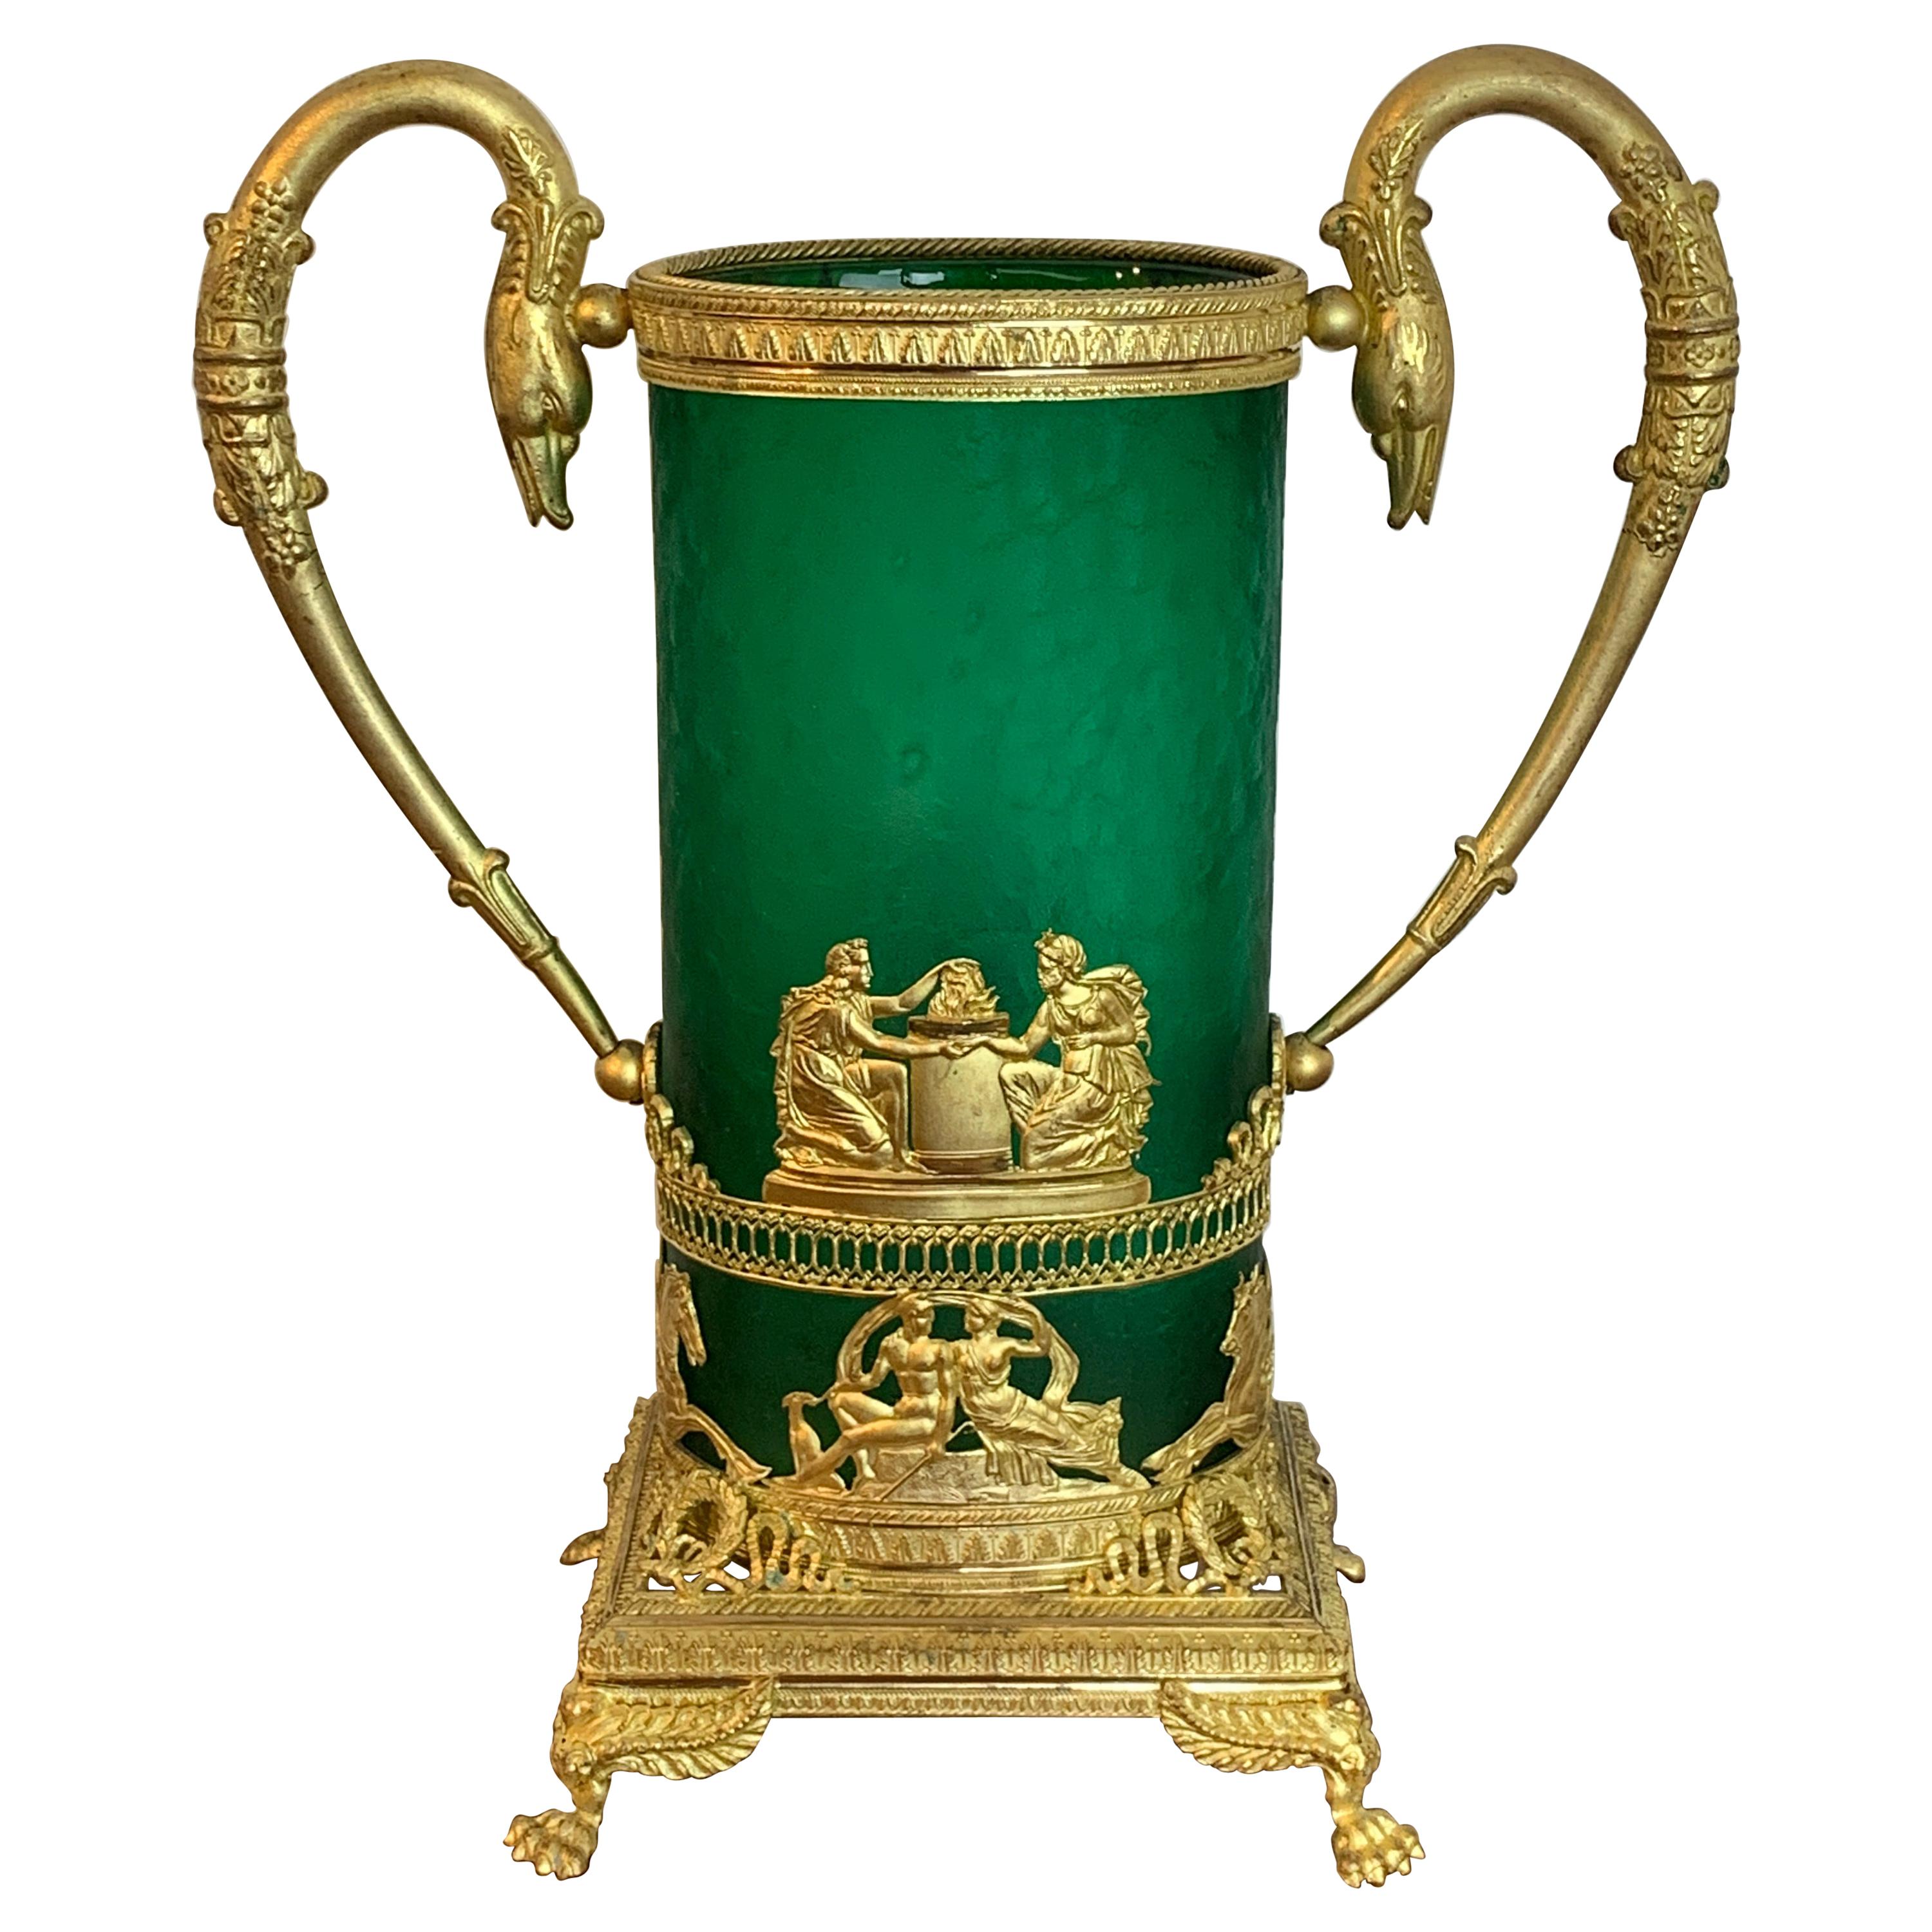 Exquisite Baccarat Empire Style Ormolu Mounted Vase, in Green